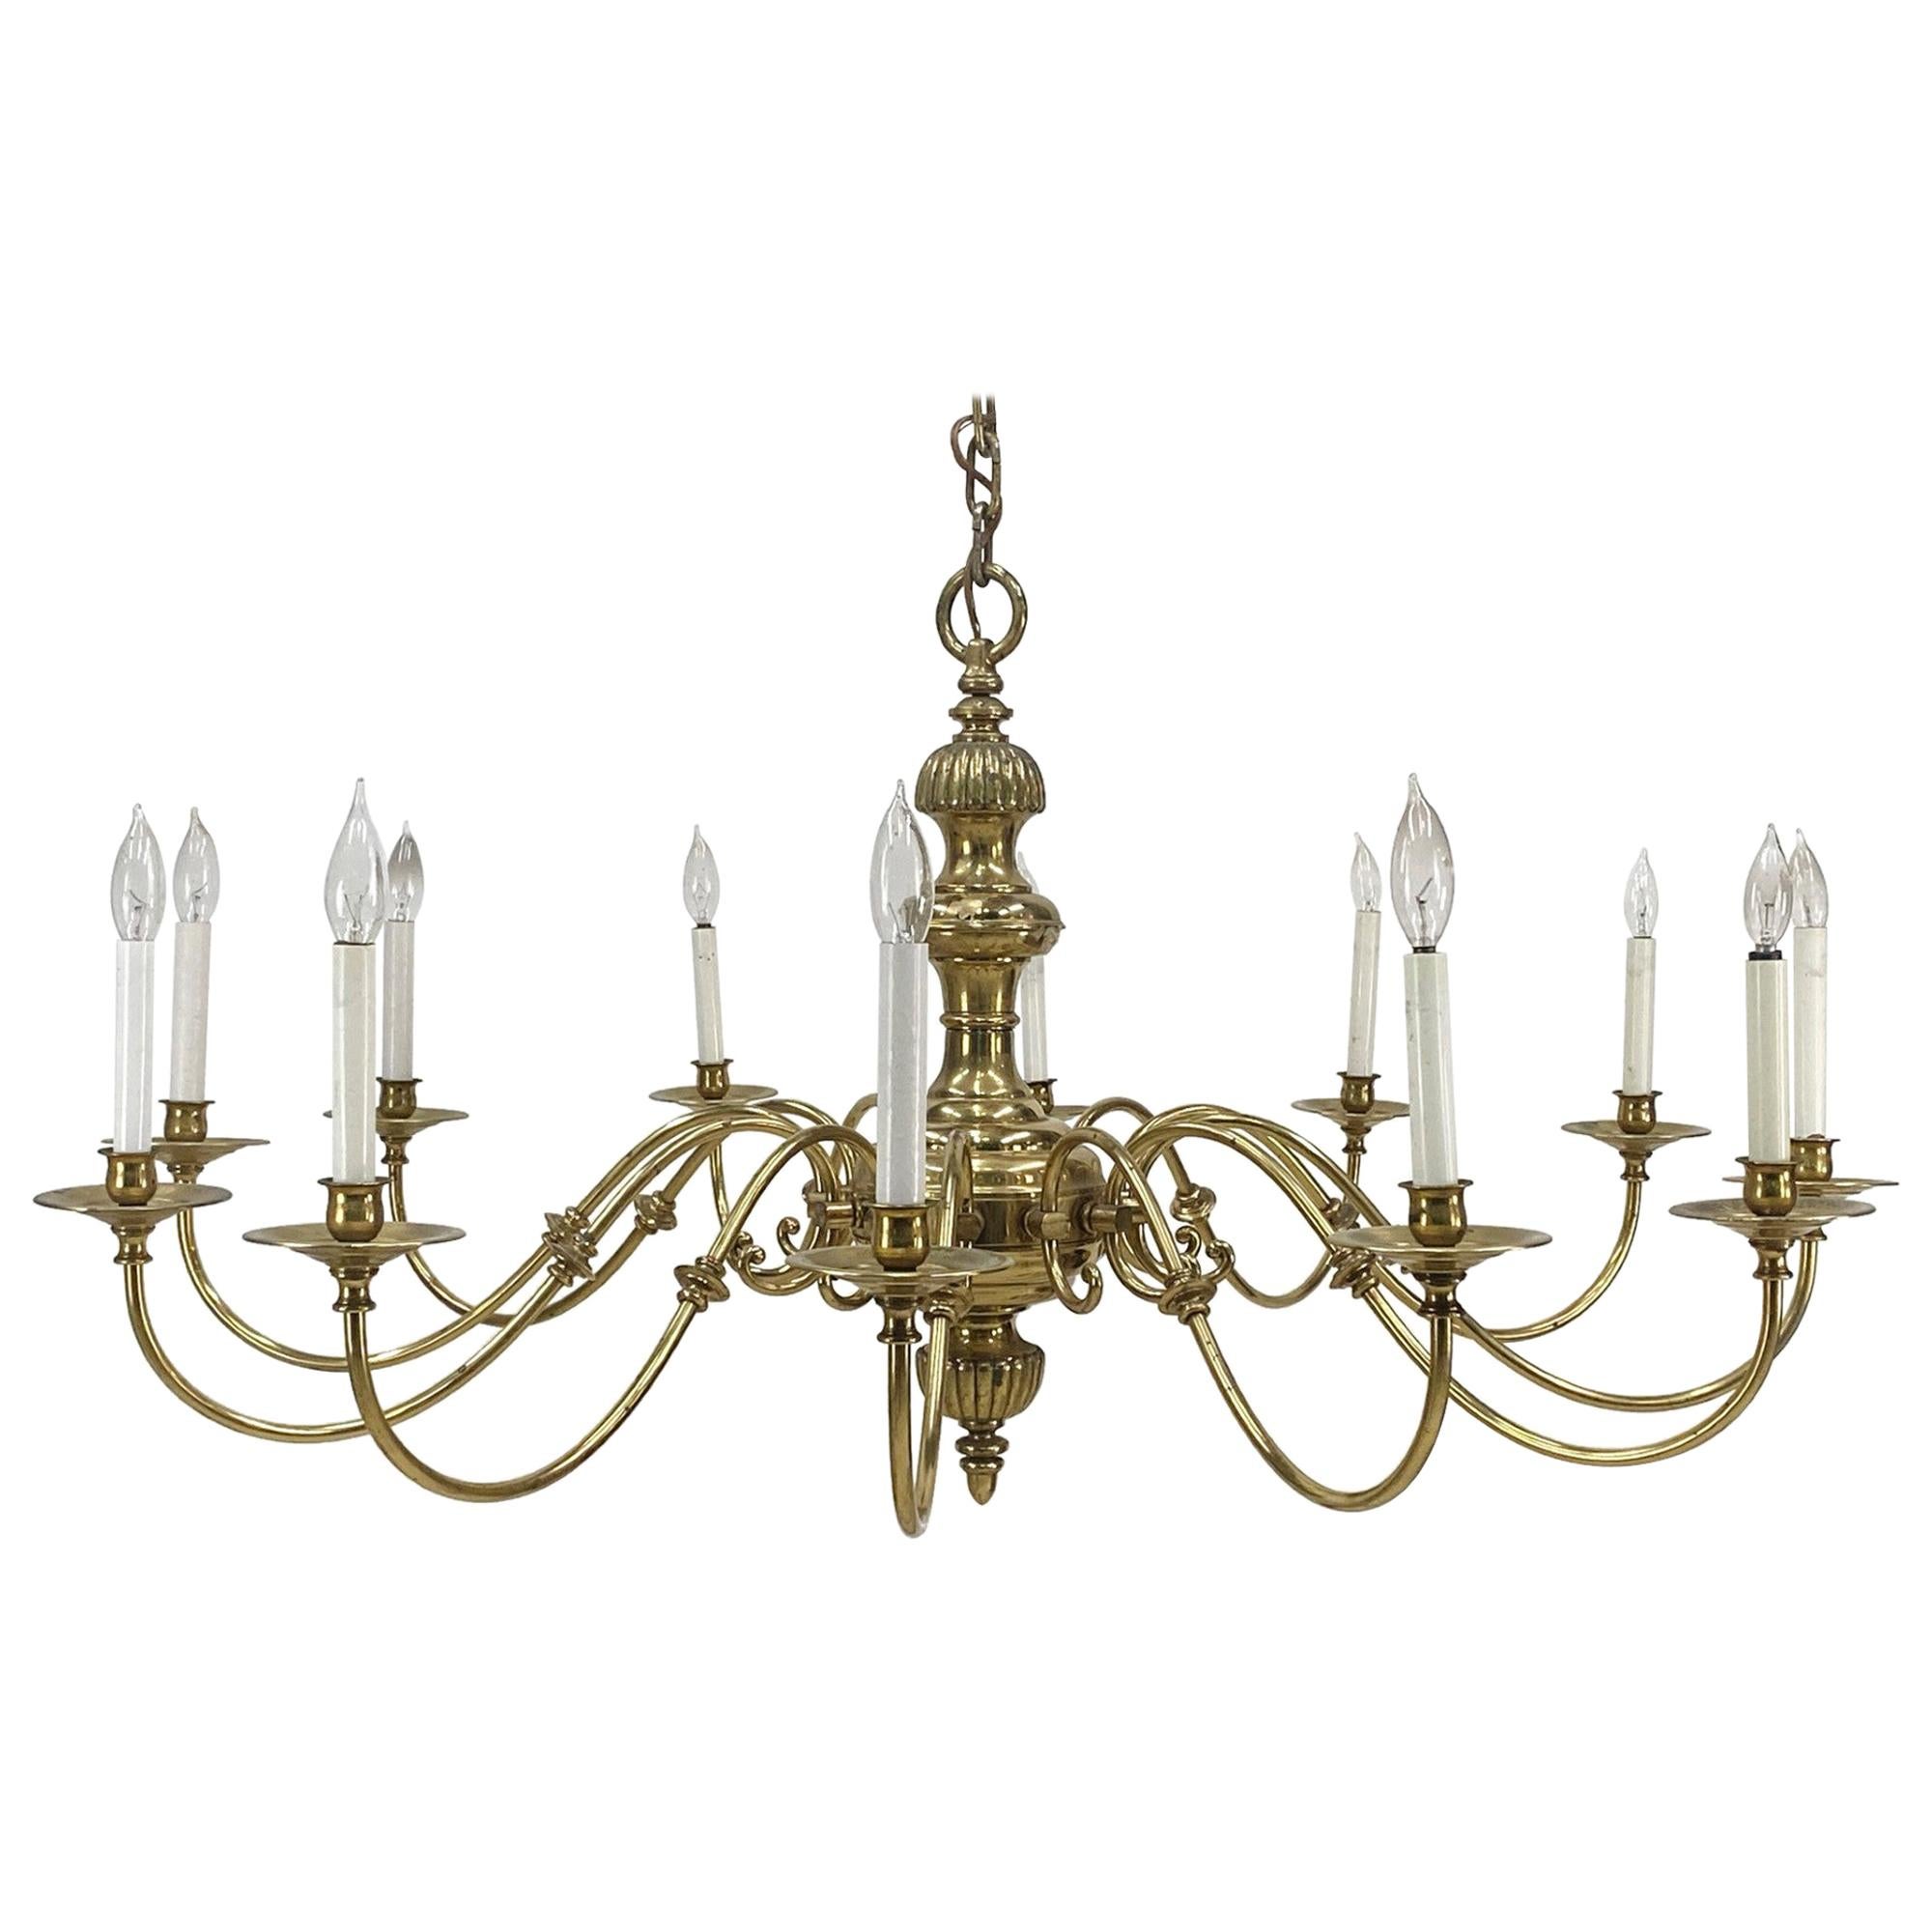 12 Arm Williamsburg Brass Ballroom Chandelier Small Qty Available